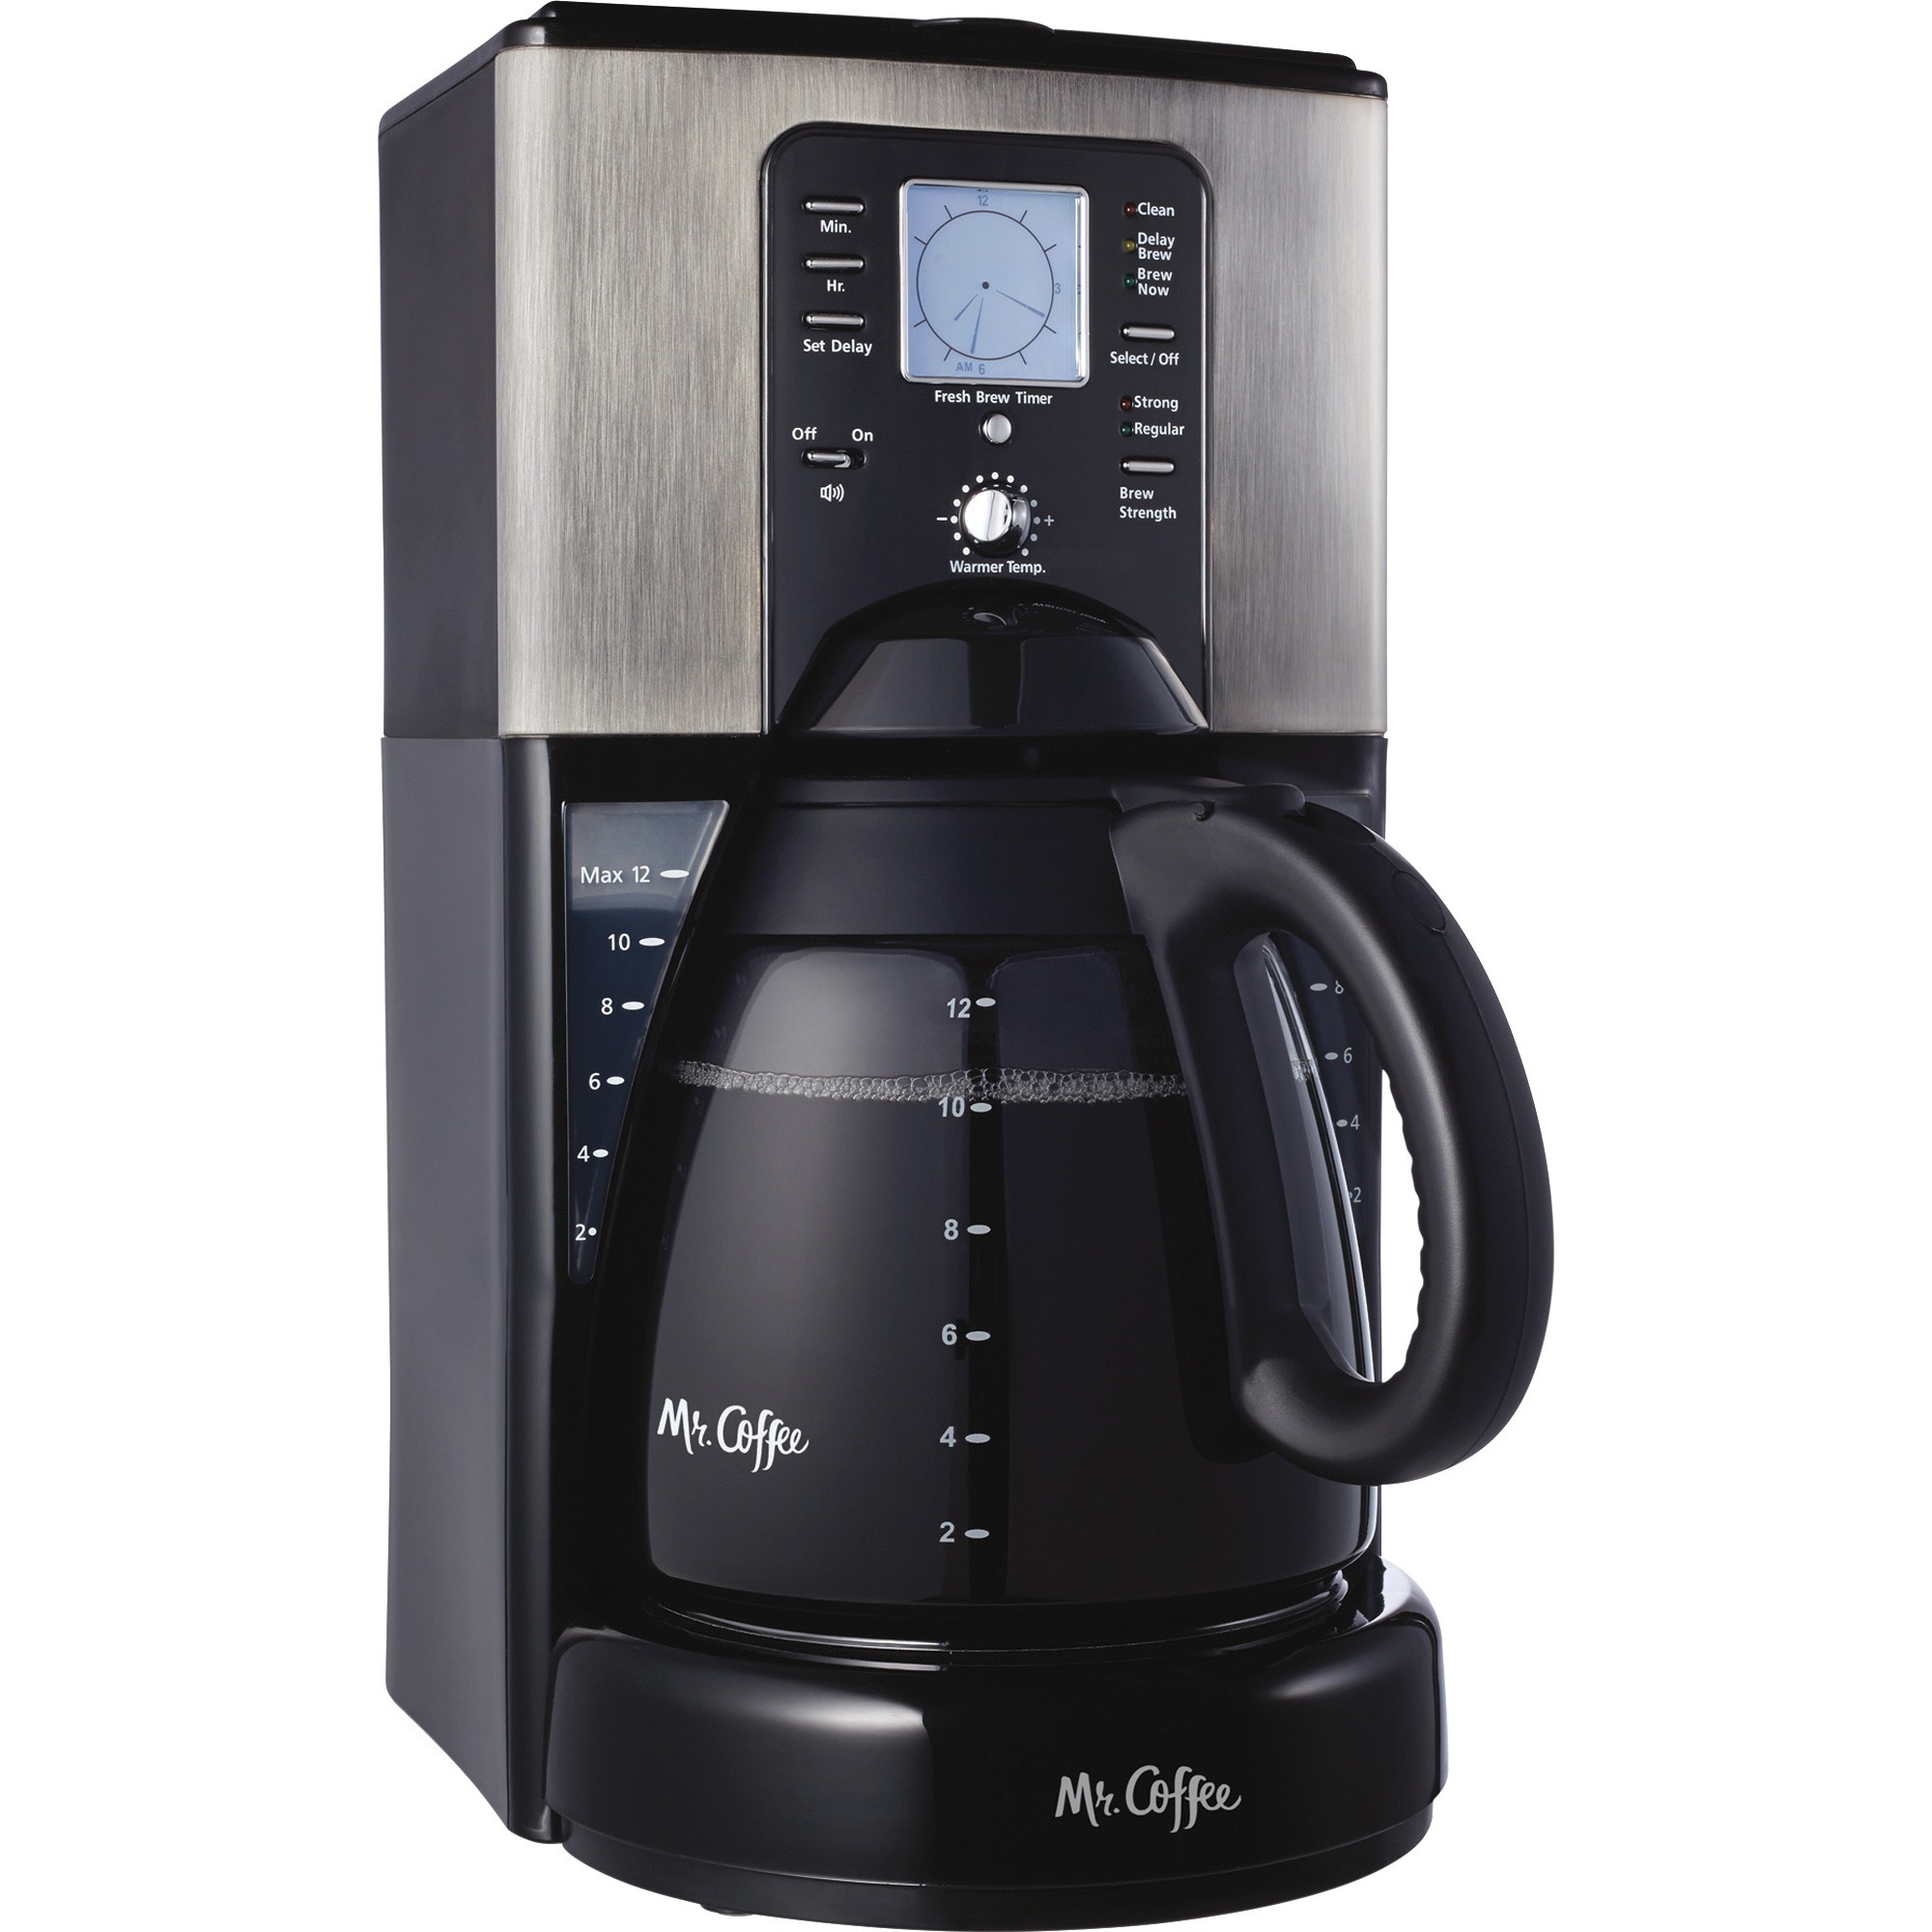 Mr. Coffee, MFEFTX41NP, 12-Cup Programmable Coffeemaker, 1, Black,Gray,Stainless Steel - image 1 of 3